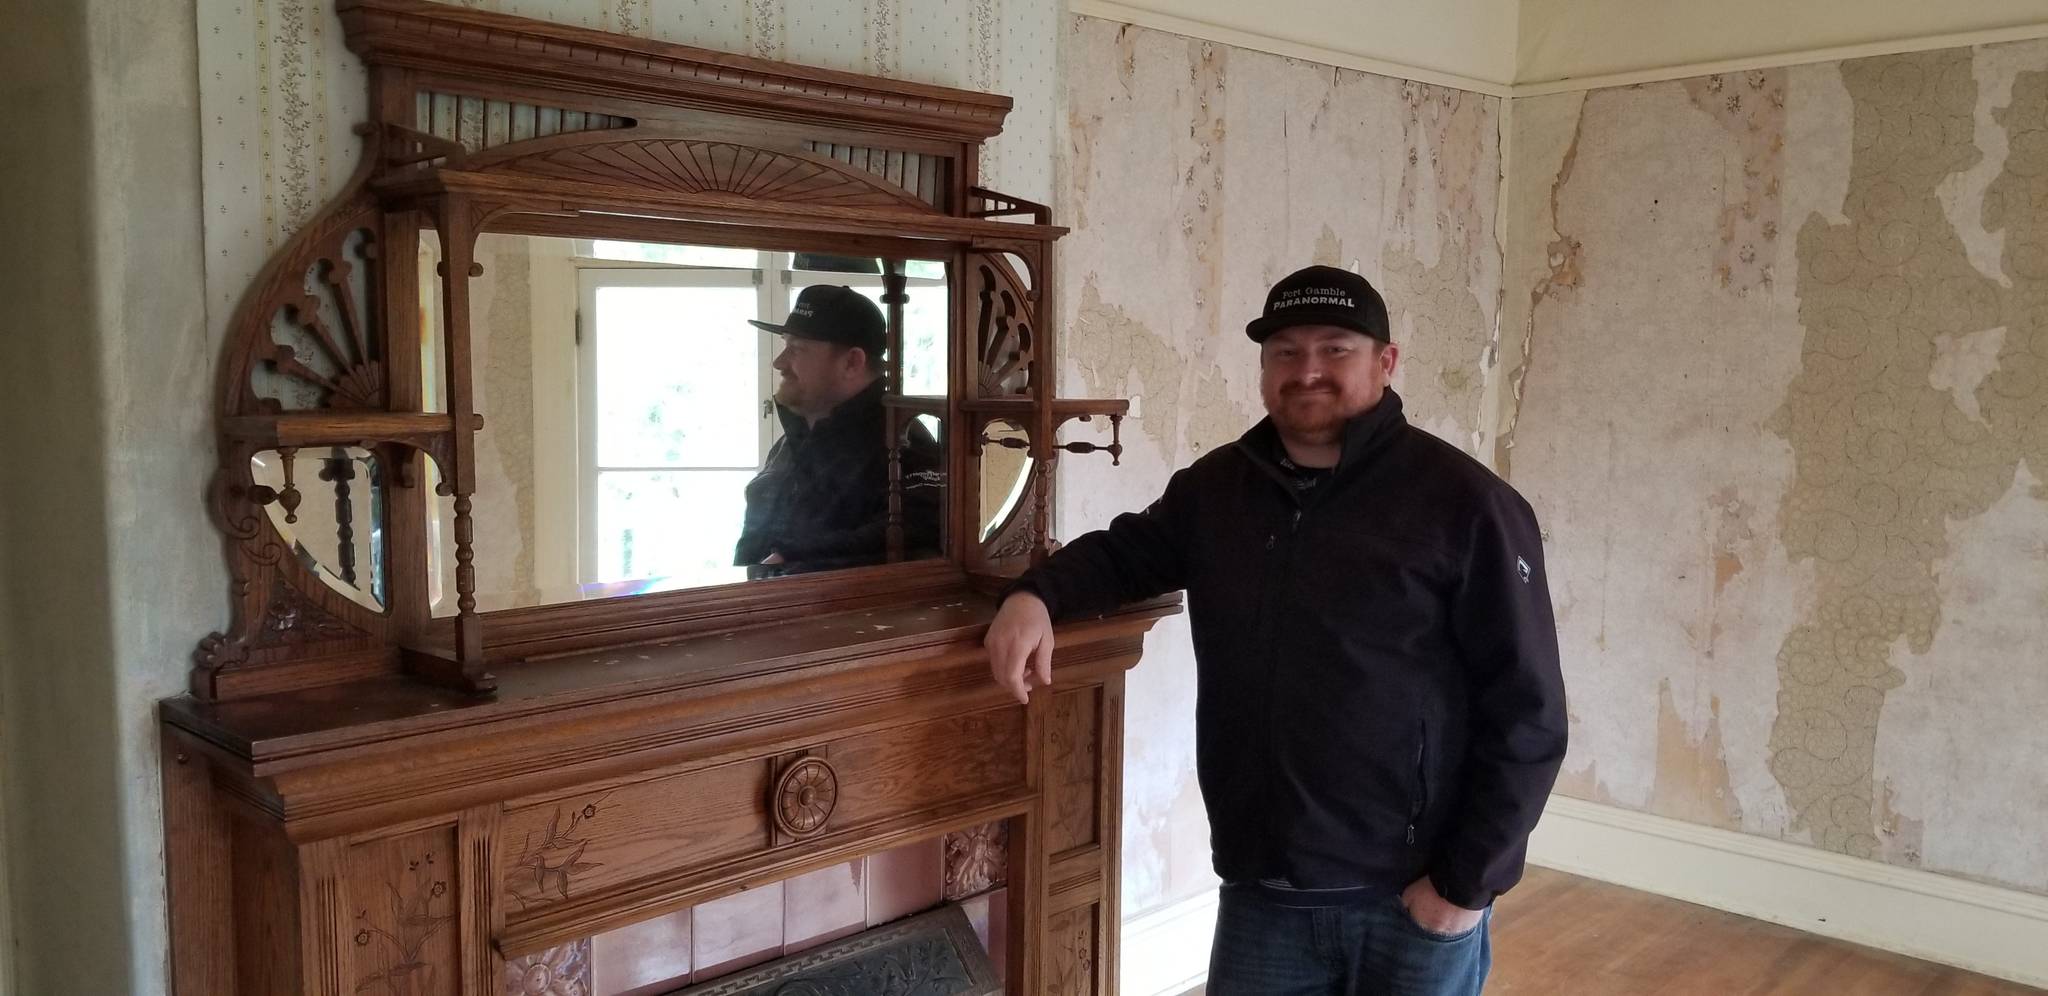 Pete Orbea poses for a photo in front of one of the many fireplaces inside the Walker-Ames House in Port Gamble. Nick Twietmeyer | Kitsap News Group.